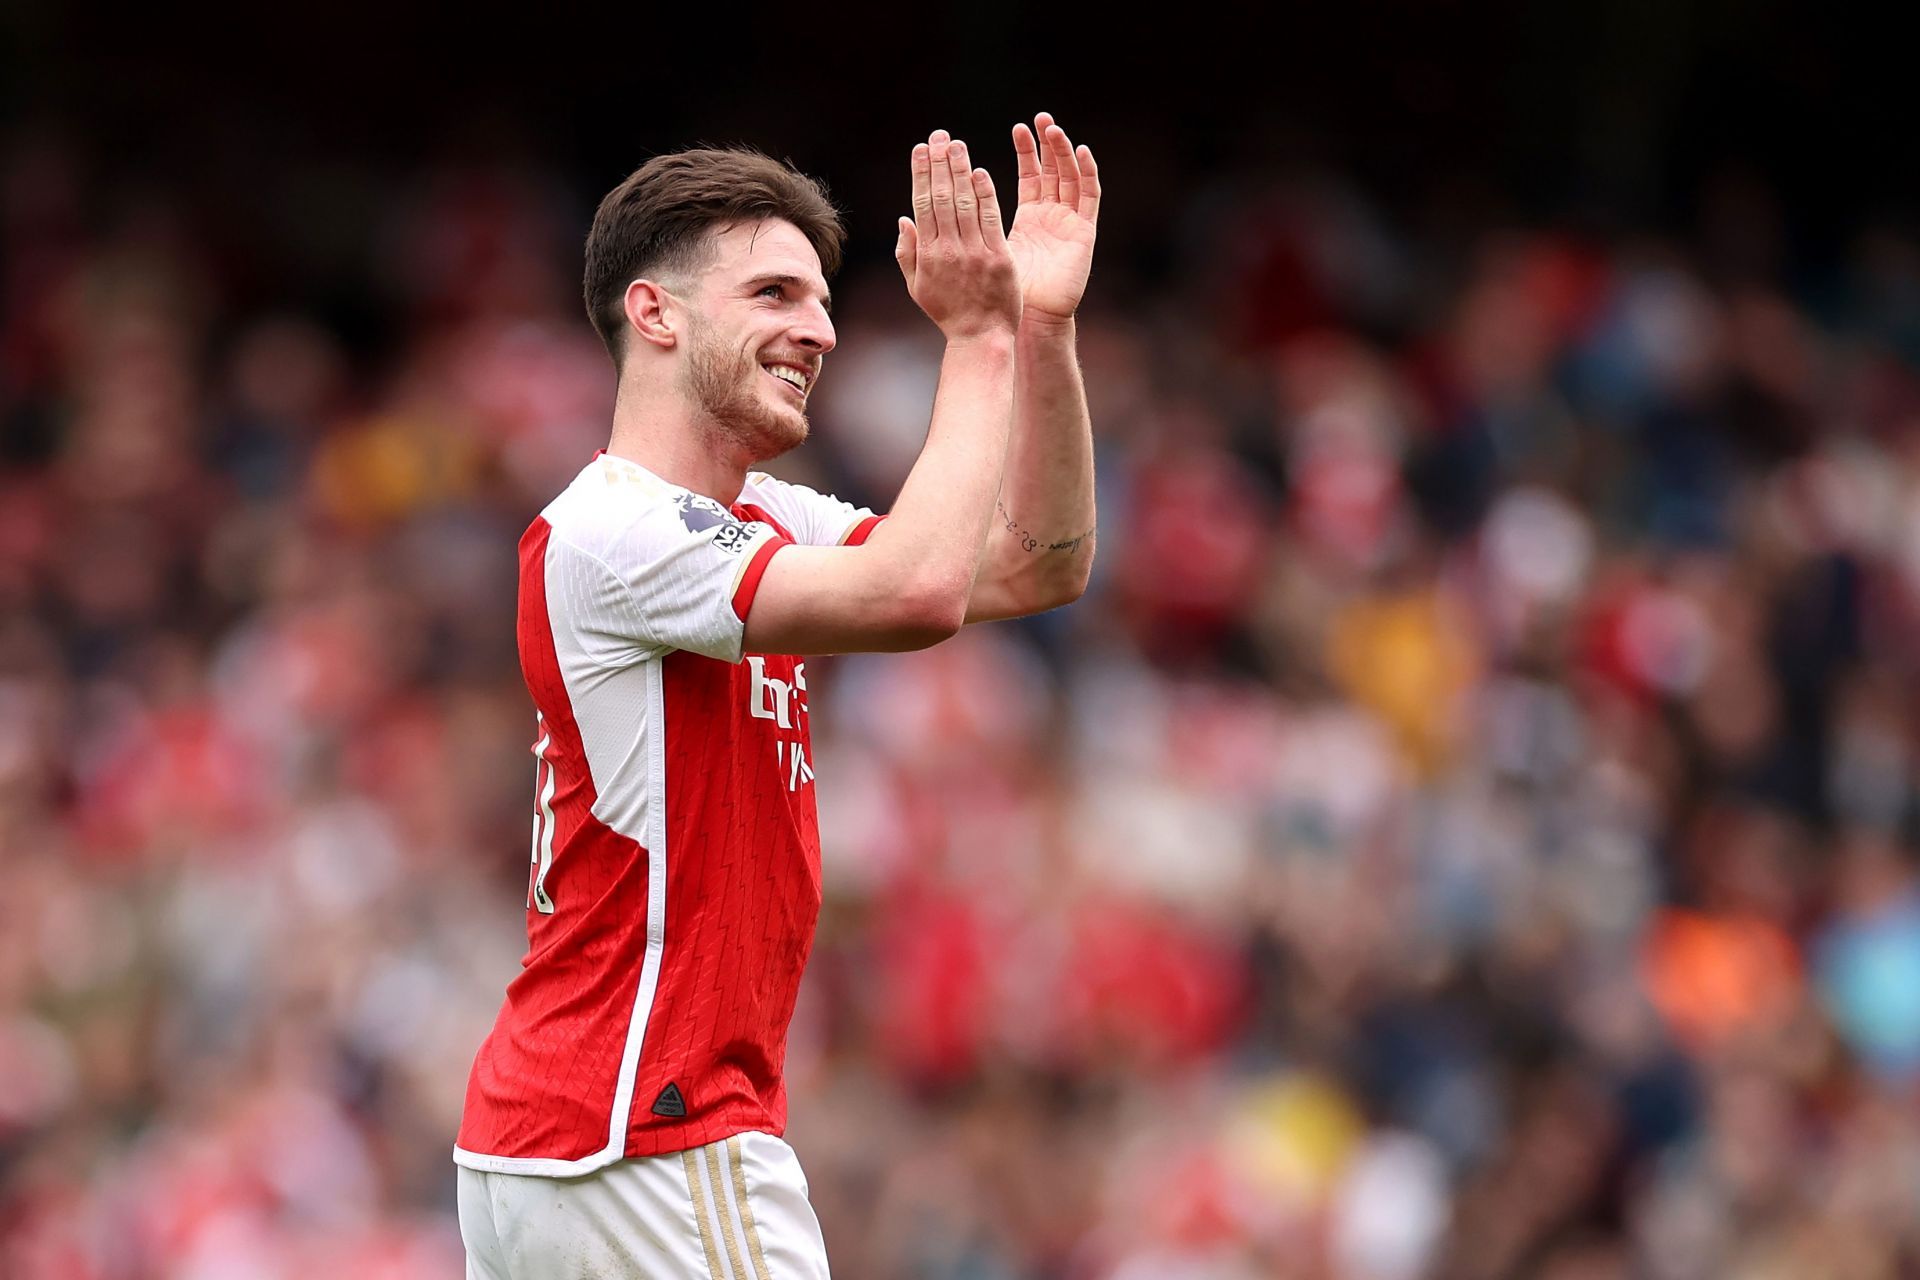 Declan Rice has been an excellent buy for Arsenal.